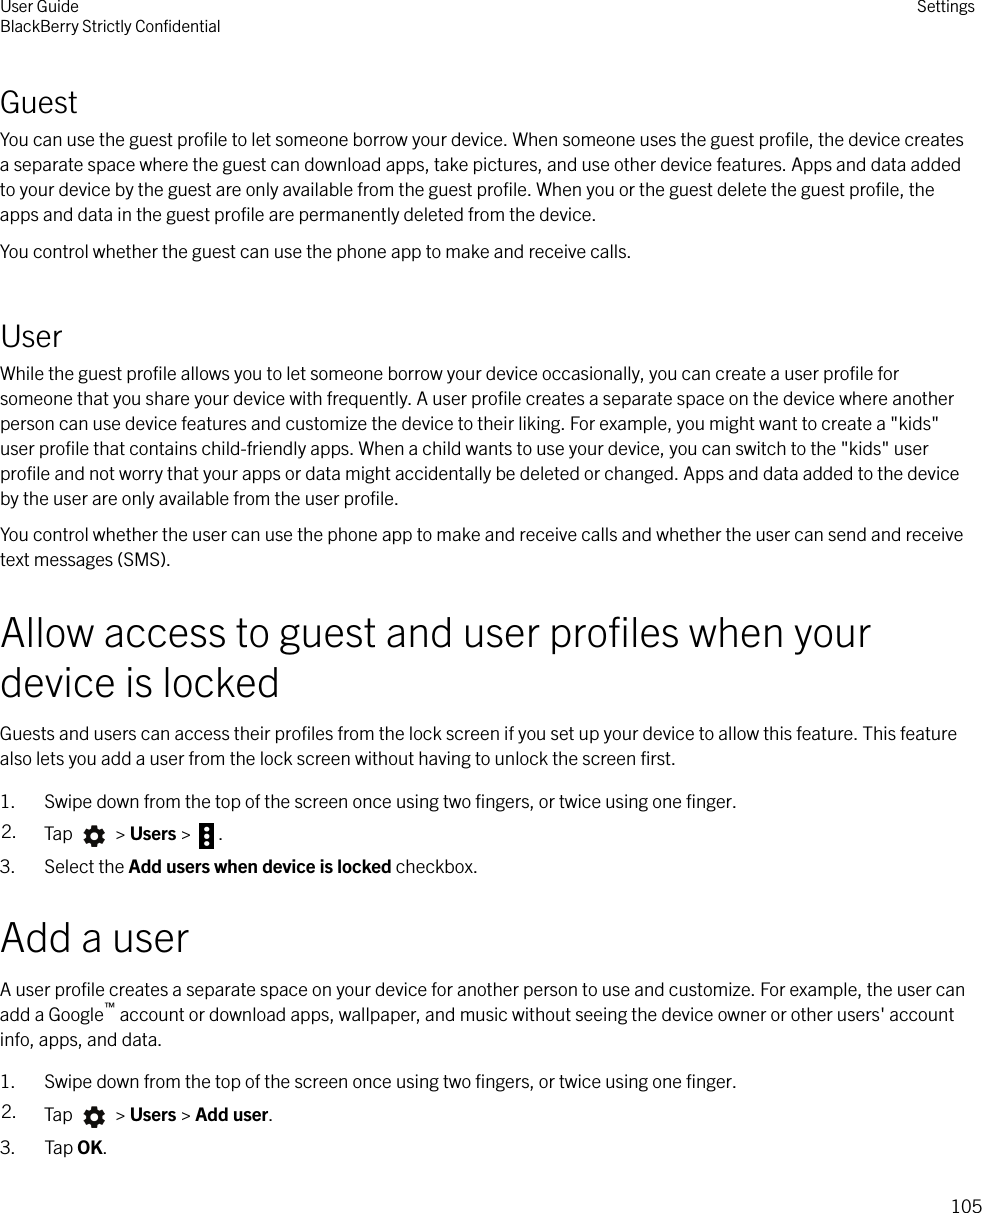 GuestYou can use the guest proﬁle to let someone borrow your device. When someone uses the guest proﬁle, the device createsa separate space where the guest can download apps, take pictures, and use other device features. Apps and data addedto your device by the guest are only available from the guest proﬁle. When you or the guest delete the guest proﬁle, theapps and data in the guest proﬁle are permanently deleted from the device.You control whether the guest can use the phone app to make and receive calls.UserWhile the guest proﬁle allows you to let someone borrow your device occasionally, you can create a user proﬁle forsomeone that you share your device with frequently. A user proﬁle creates a separate space on the device where anotherperson can use device features and customize the device to their liking. For example, you might want to create a &quot;kids&quot;user proﬁle that contains child-friendly apps. When a child wants to use your device, you can switch to the &quot;kids&quot; userproﬁle and not worry that your apps or data might accidentally be deleted or changed. Apps and data added to the deviceby the user are only available from the user proﬁle.You control whether the user can use the phone app to make and receive calls and whether the user can send and receivetext messages (SMS).Allow access to guest and user proﬁles when yourdevice is lockedGuests and users can access their proﬁles from the lock screen if you set up your device to allow this feature. This featurealso lets you add a user from the lock screen without having to unlock the screen ﬁrst.1. Swipe down from the top of the screen once using two ﬁngers, or twice using one ﬁnger.2. Tap   &gt; Users &gt;  .3. Select the Add users when device is locked checkbox.Add a userA user proﬁle creates a separate space on your device for another person to use and customize. For example, the user canadd a Google™ account or download apps, wallpaper, and music without seeing the device owner or other users&apos; accountinfo, apps, and data.1. Swipe down from the top of the screen once using two ﬁngers, or twice using one ﬁnger.2. Tap   &gt; Users &gt; Add user.3. Tap OK.User GuideBlackBerry Strictly ConﬁdentialSettings105